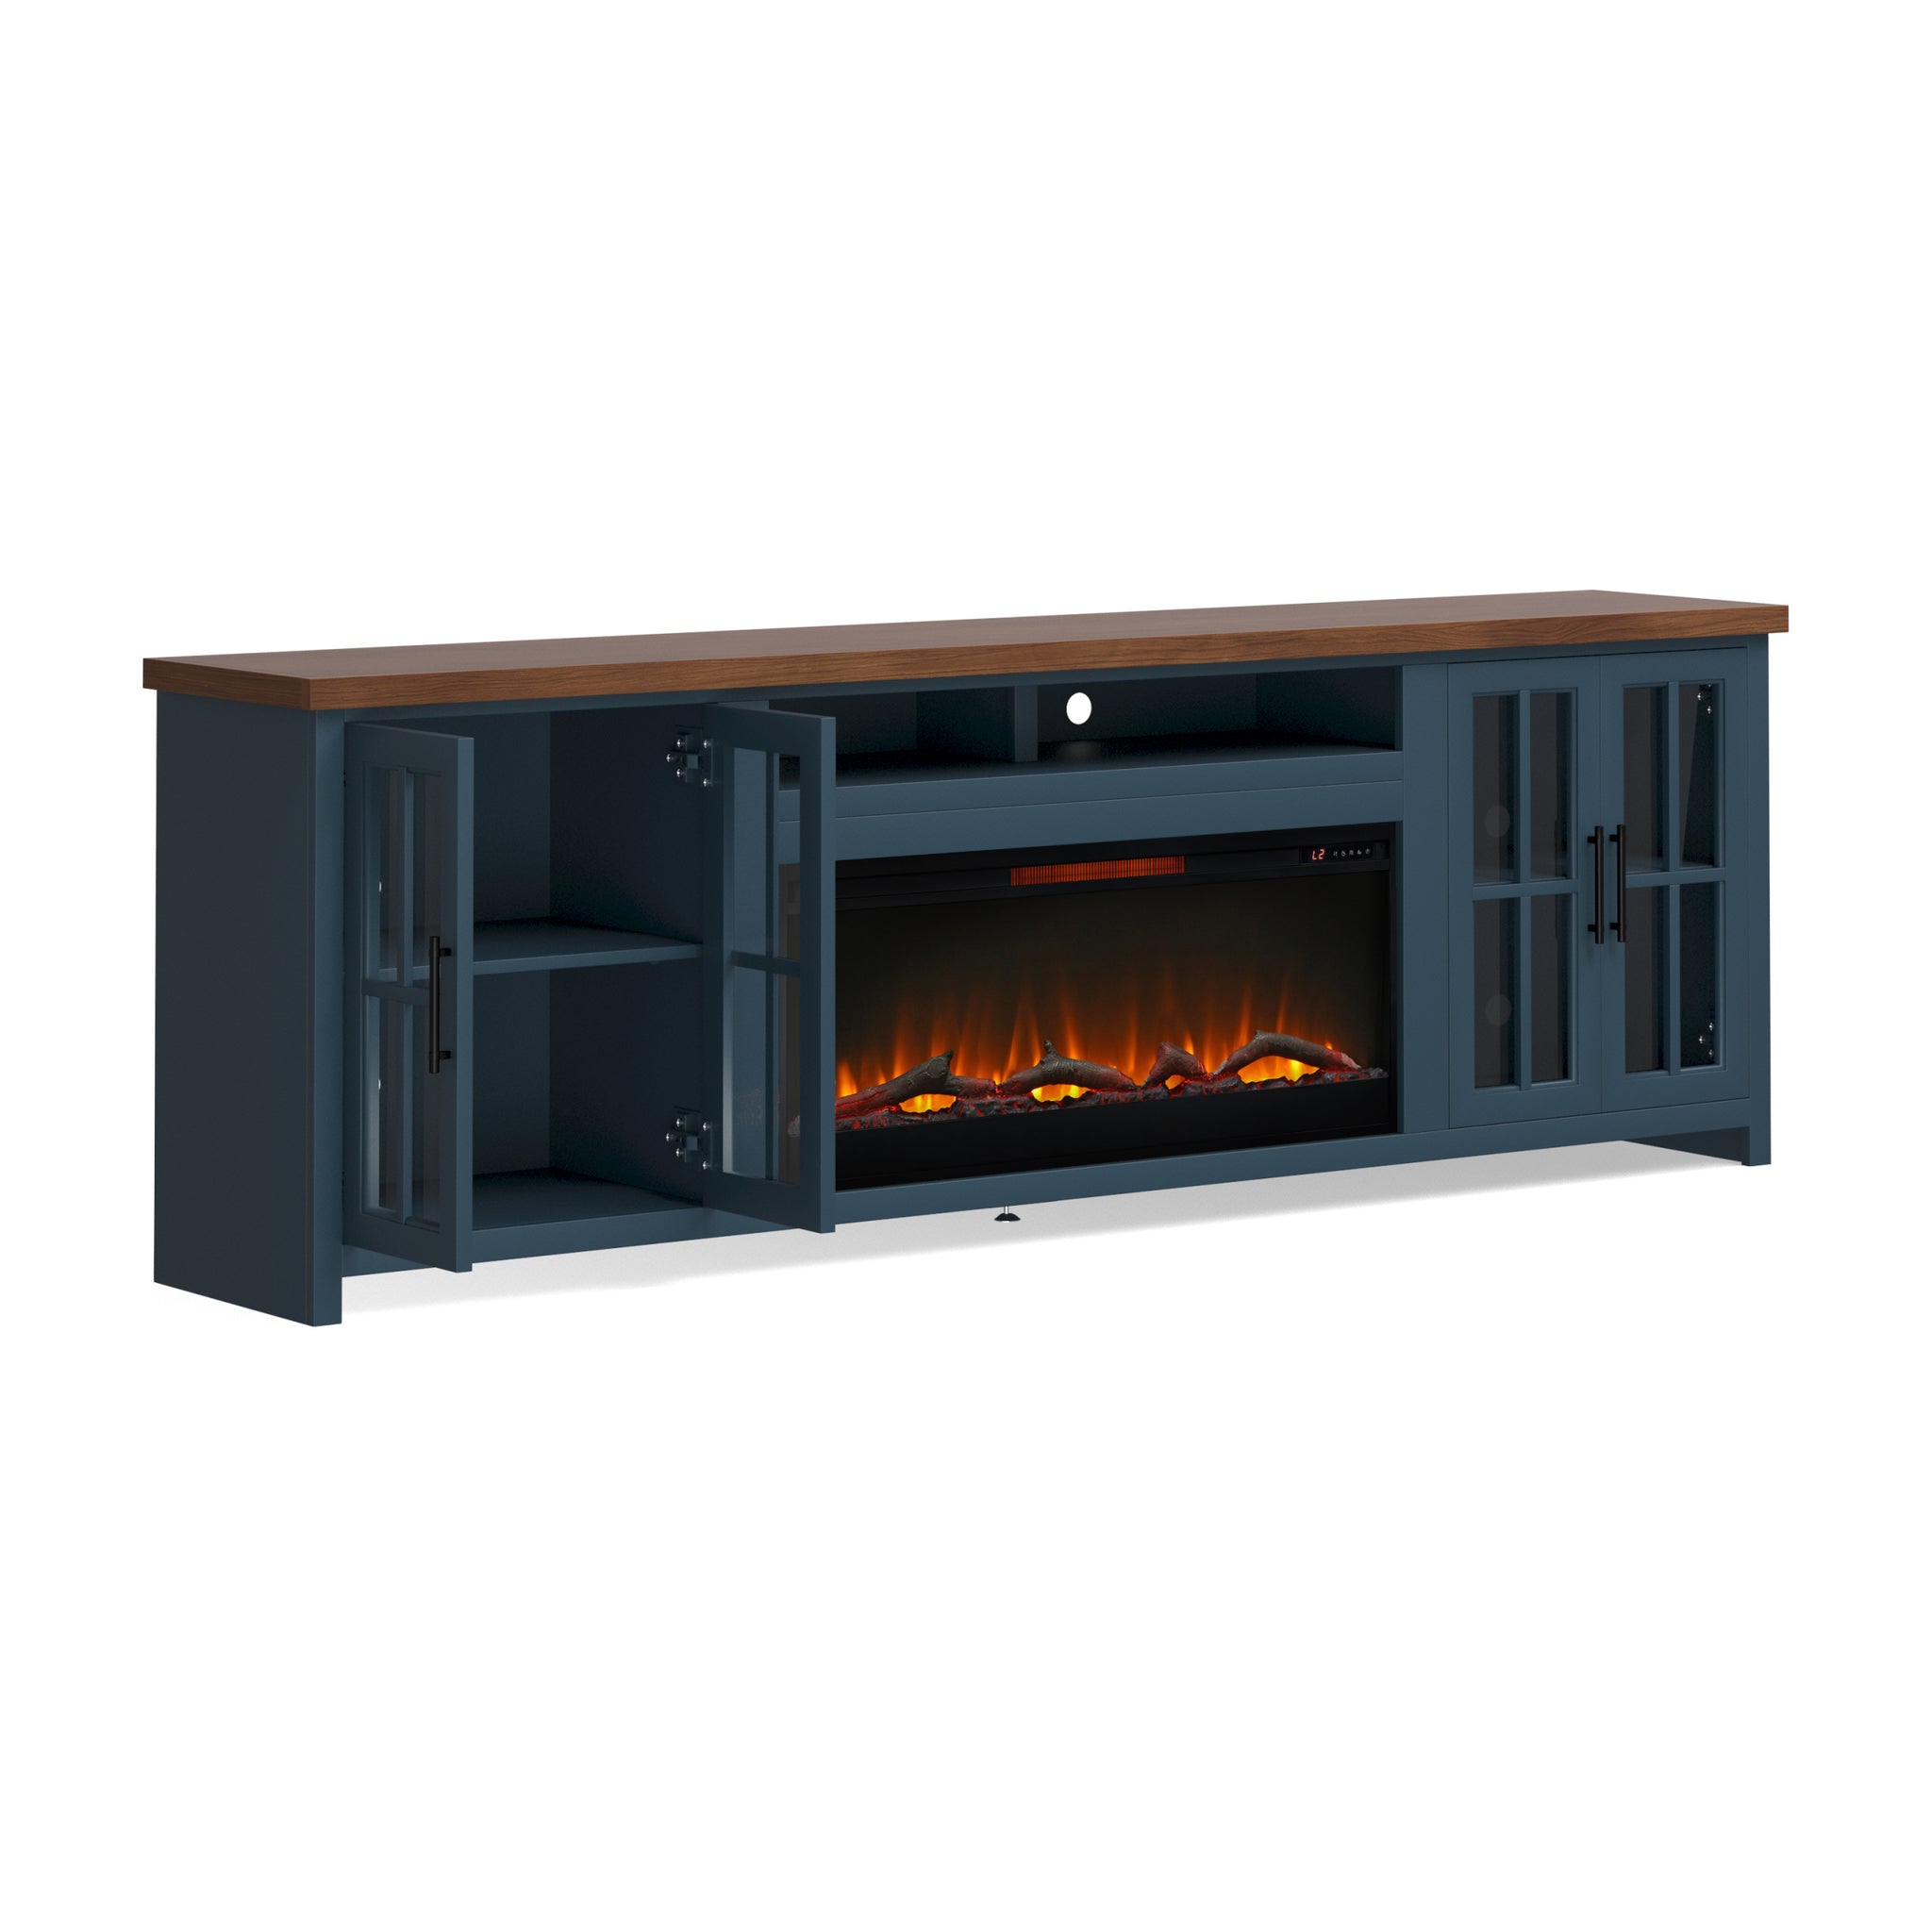 Nantucket 97 inch Fireplace TV Stand 41-50-electric-no-blue-400-vent free-primary